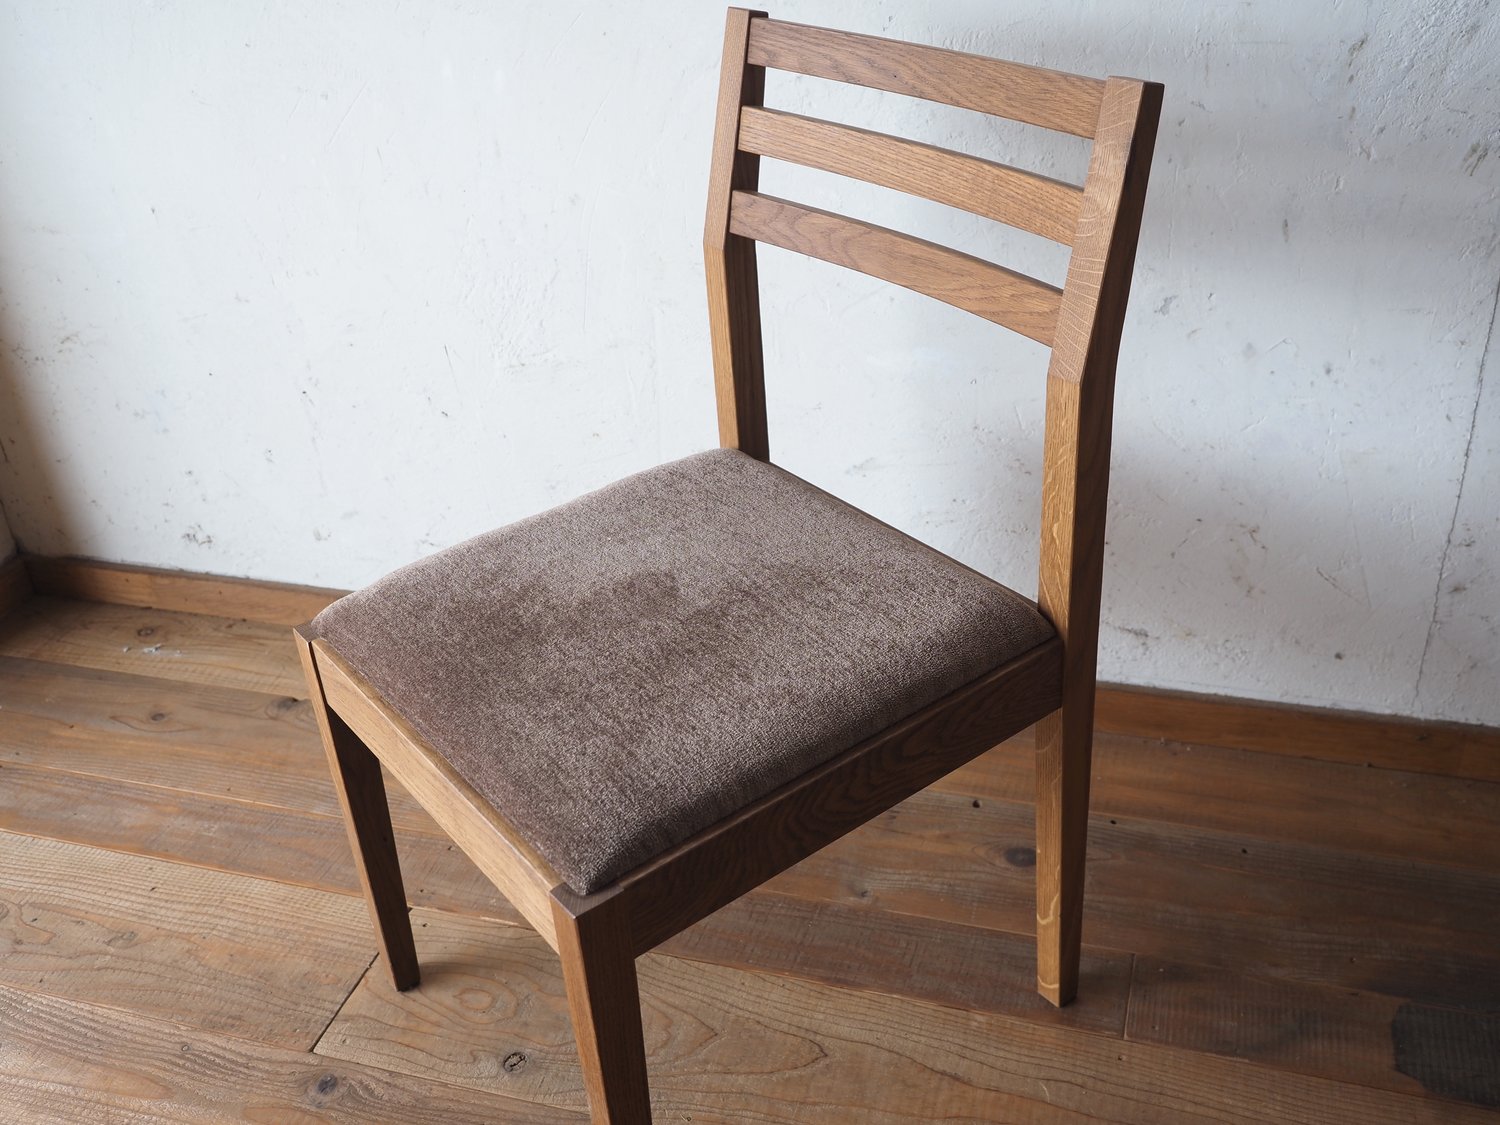 SQUARE CHAIR